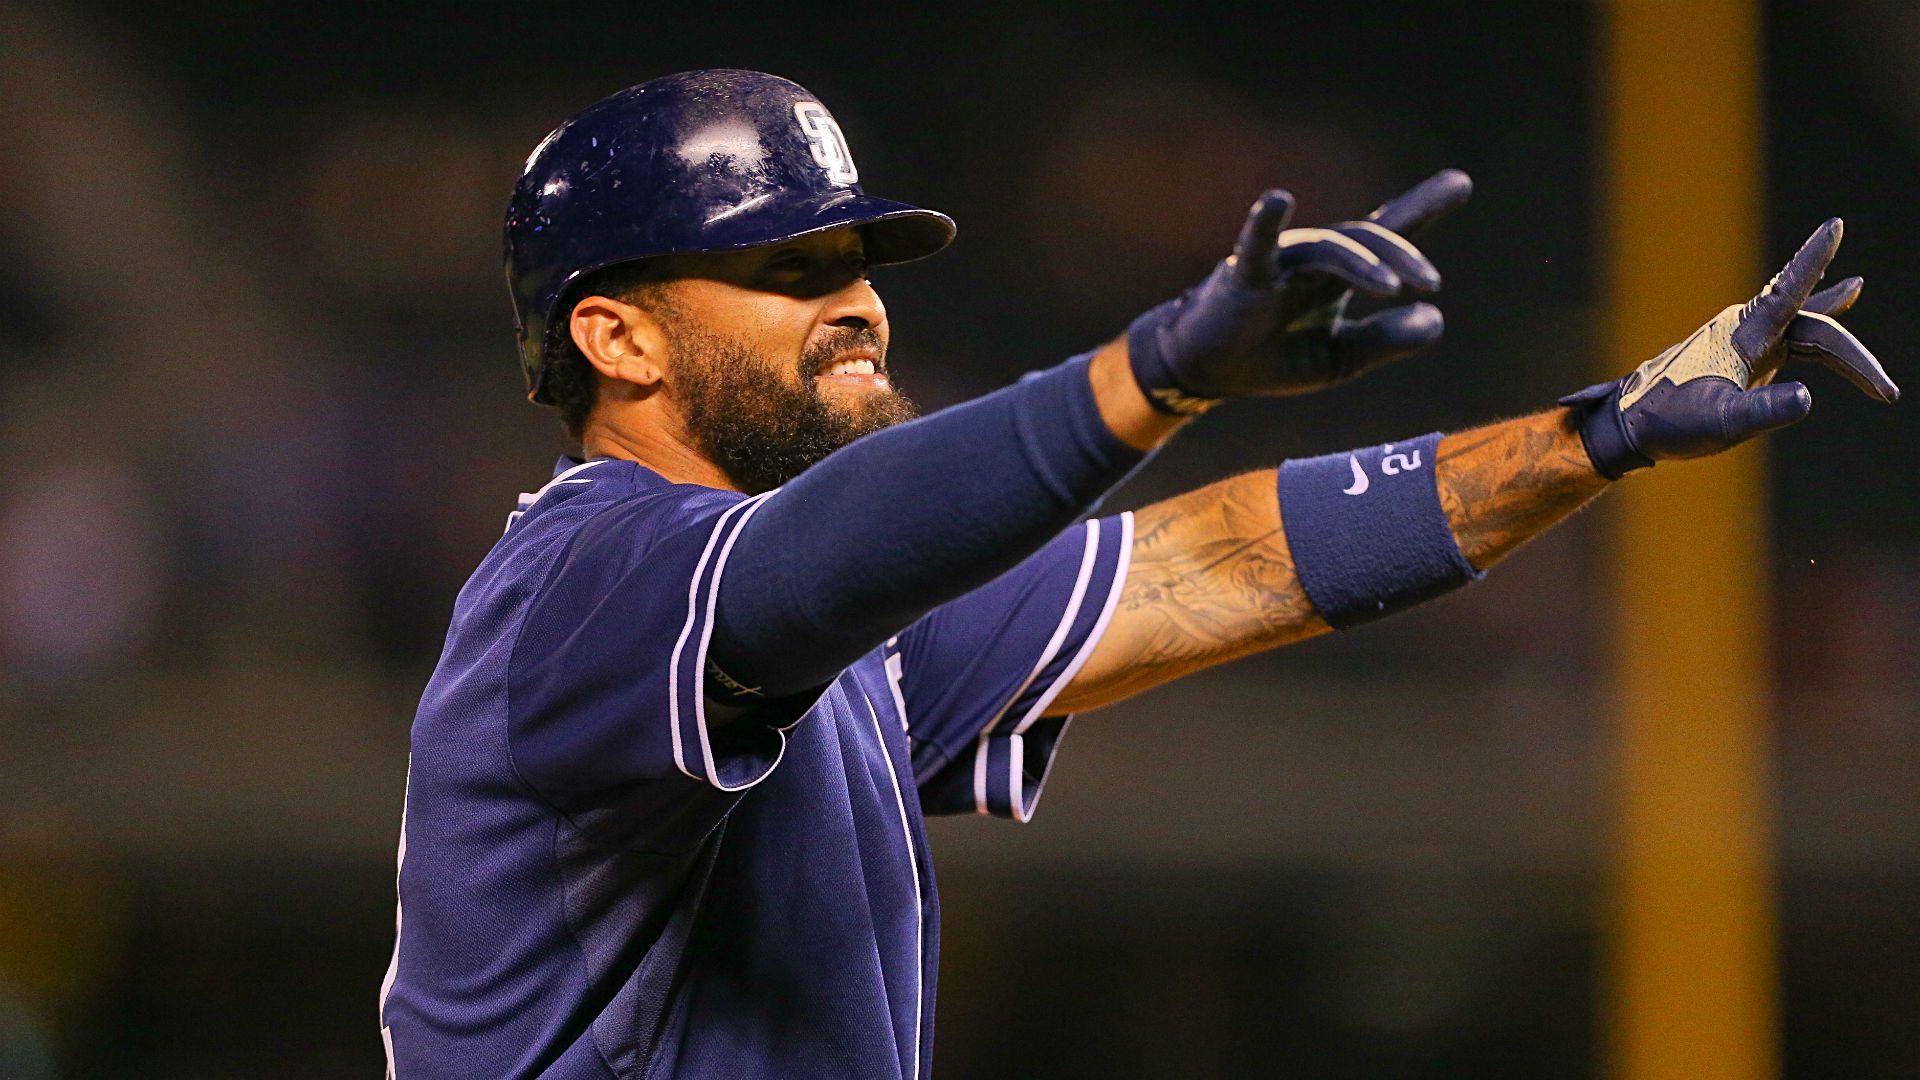 MLB scores, highlights: Matt Kemp becomes first Padres player to